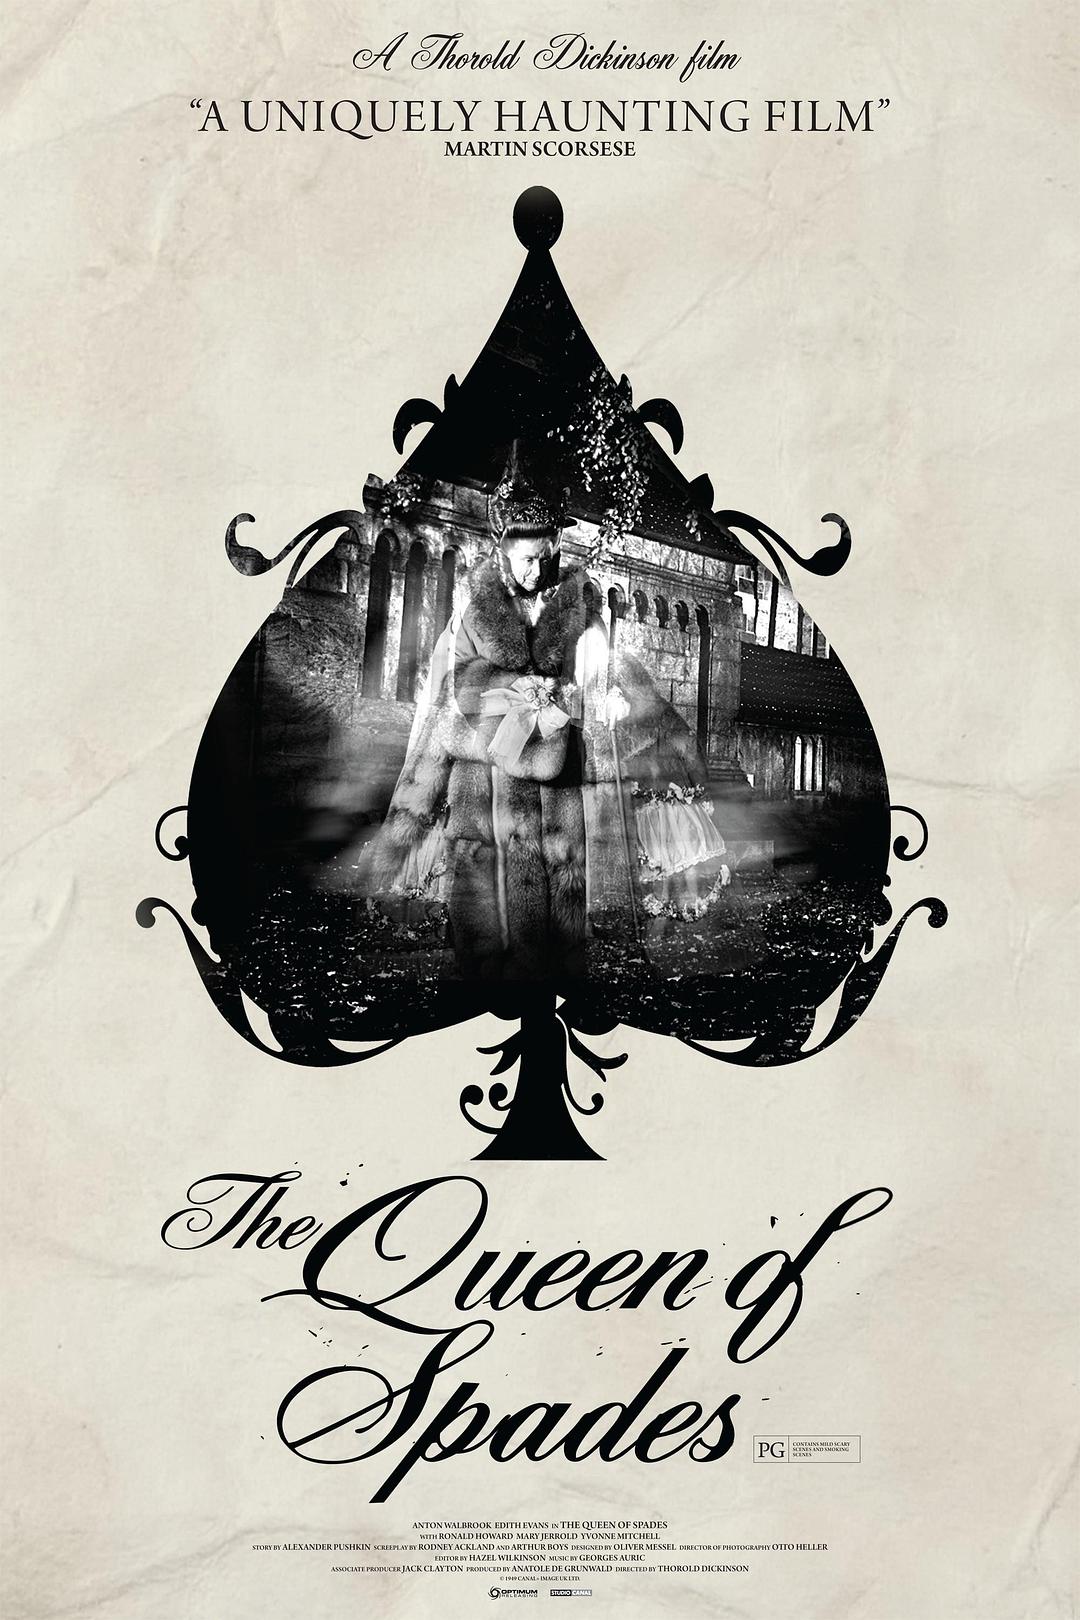  The.Queen.of.Spades.1949.1080p.BluRay.REMUX.AVC.DTS-HD.MA.2.0-FGT 24.38GB-1.png